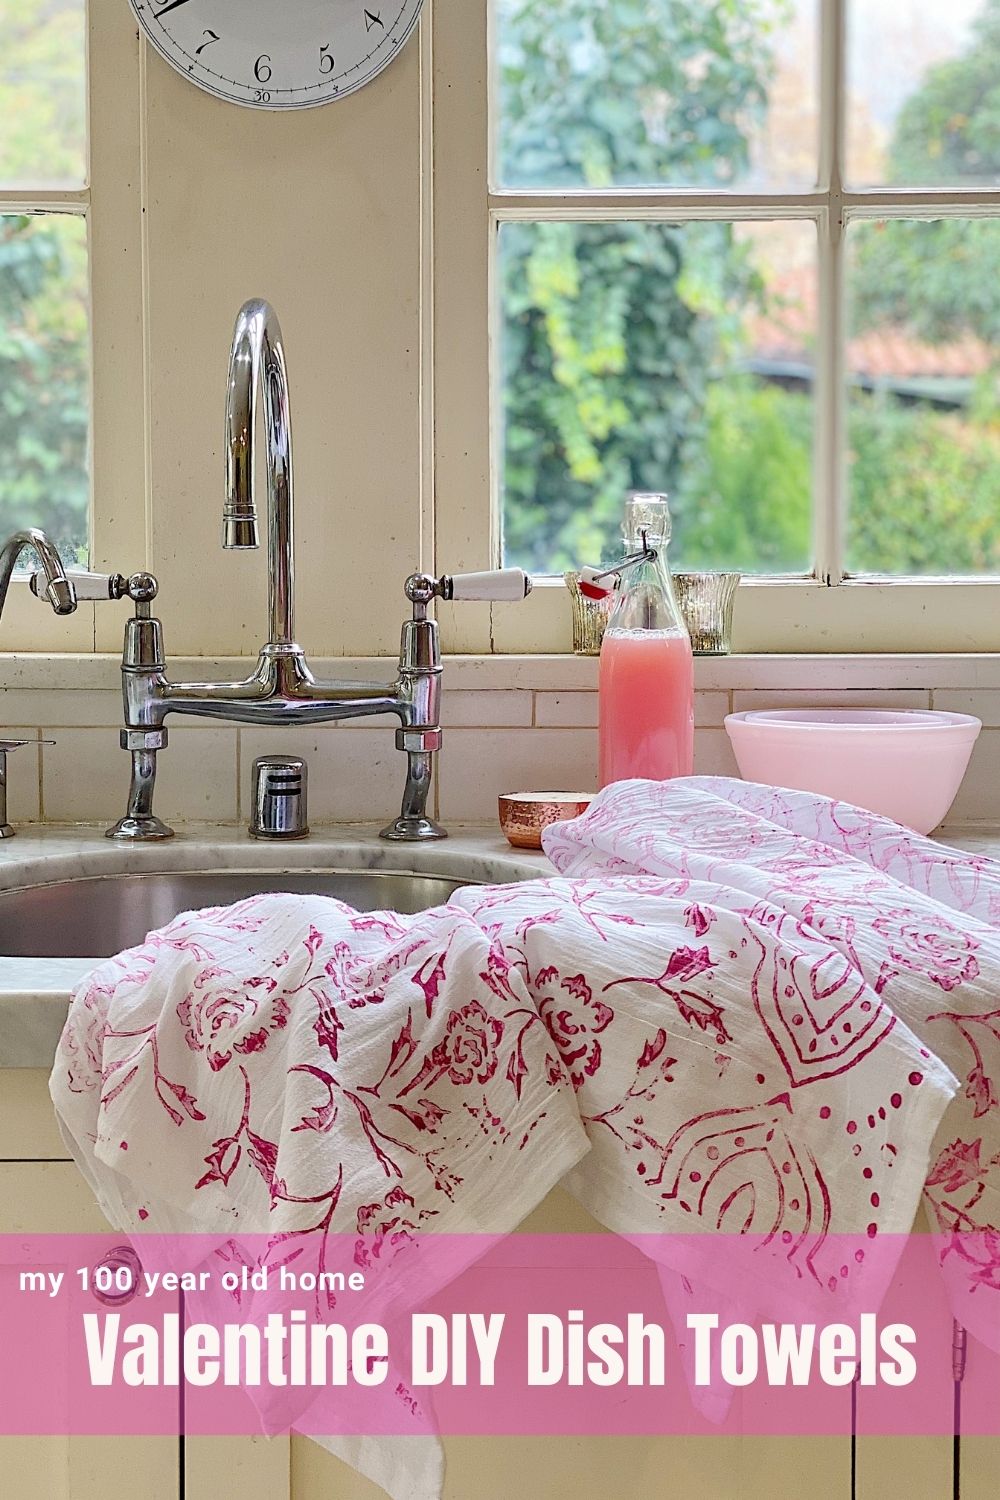 I love this Valentine DIY craft. These kitchen towels and pink dish soap are a perfect gift or a fun way to spruce up your kitchen.